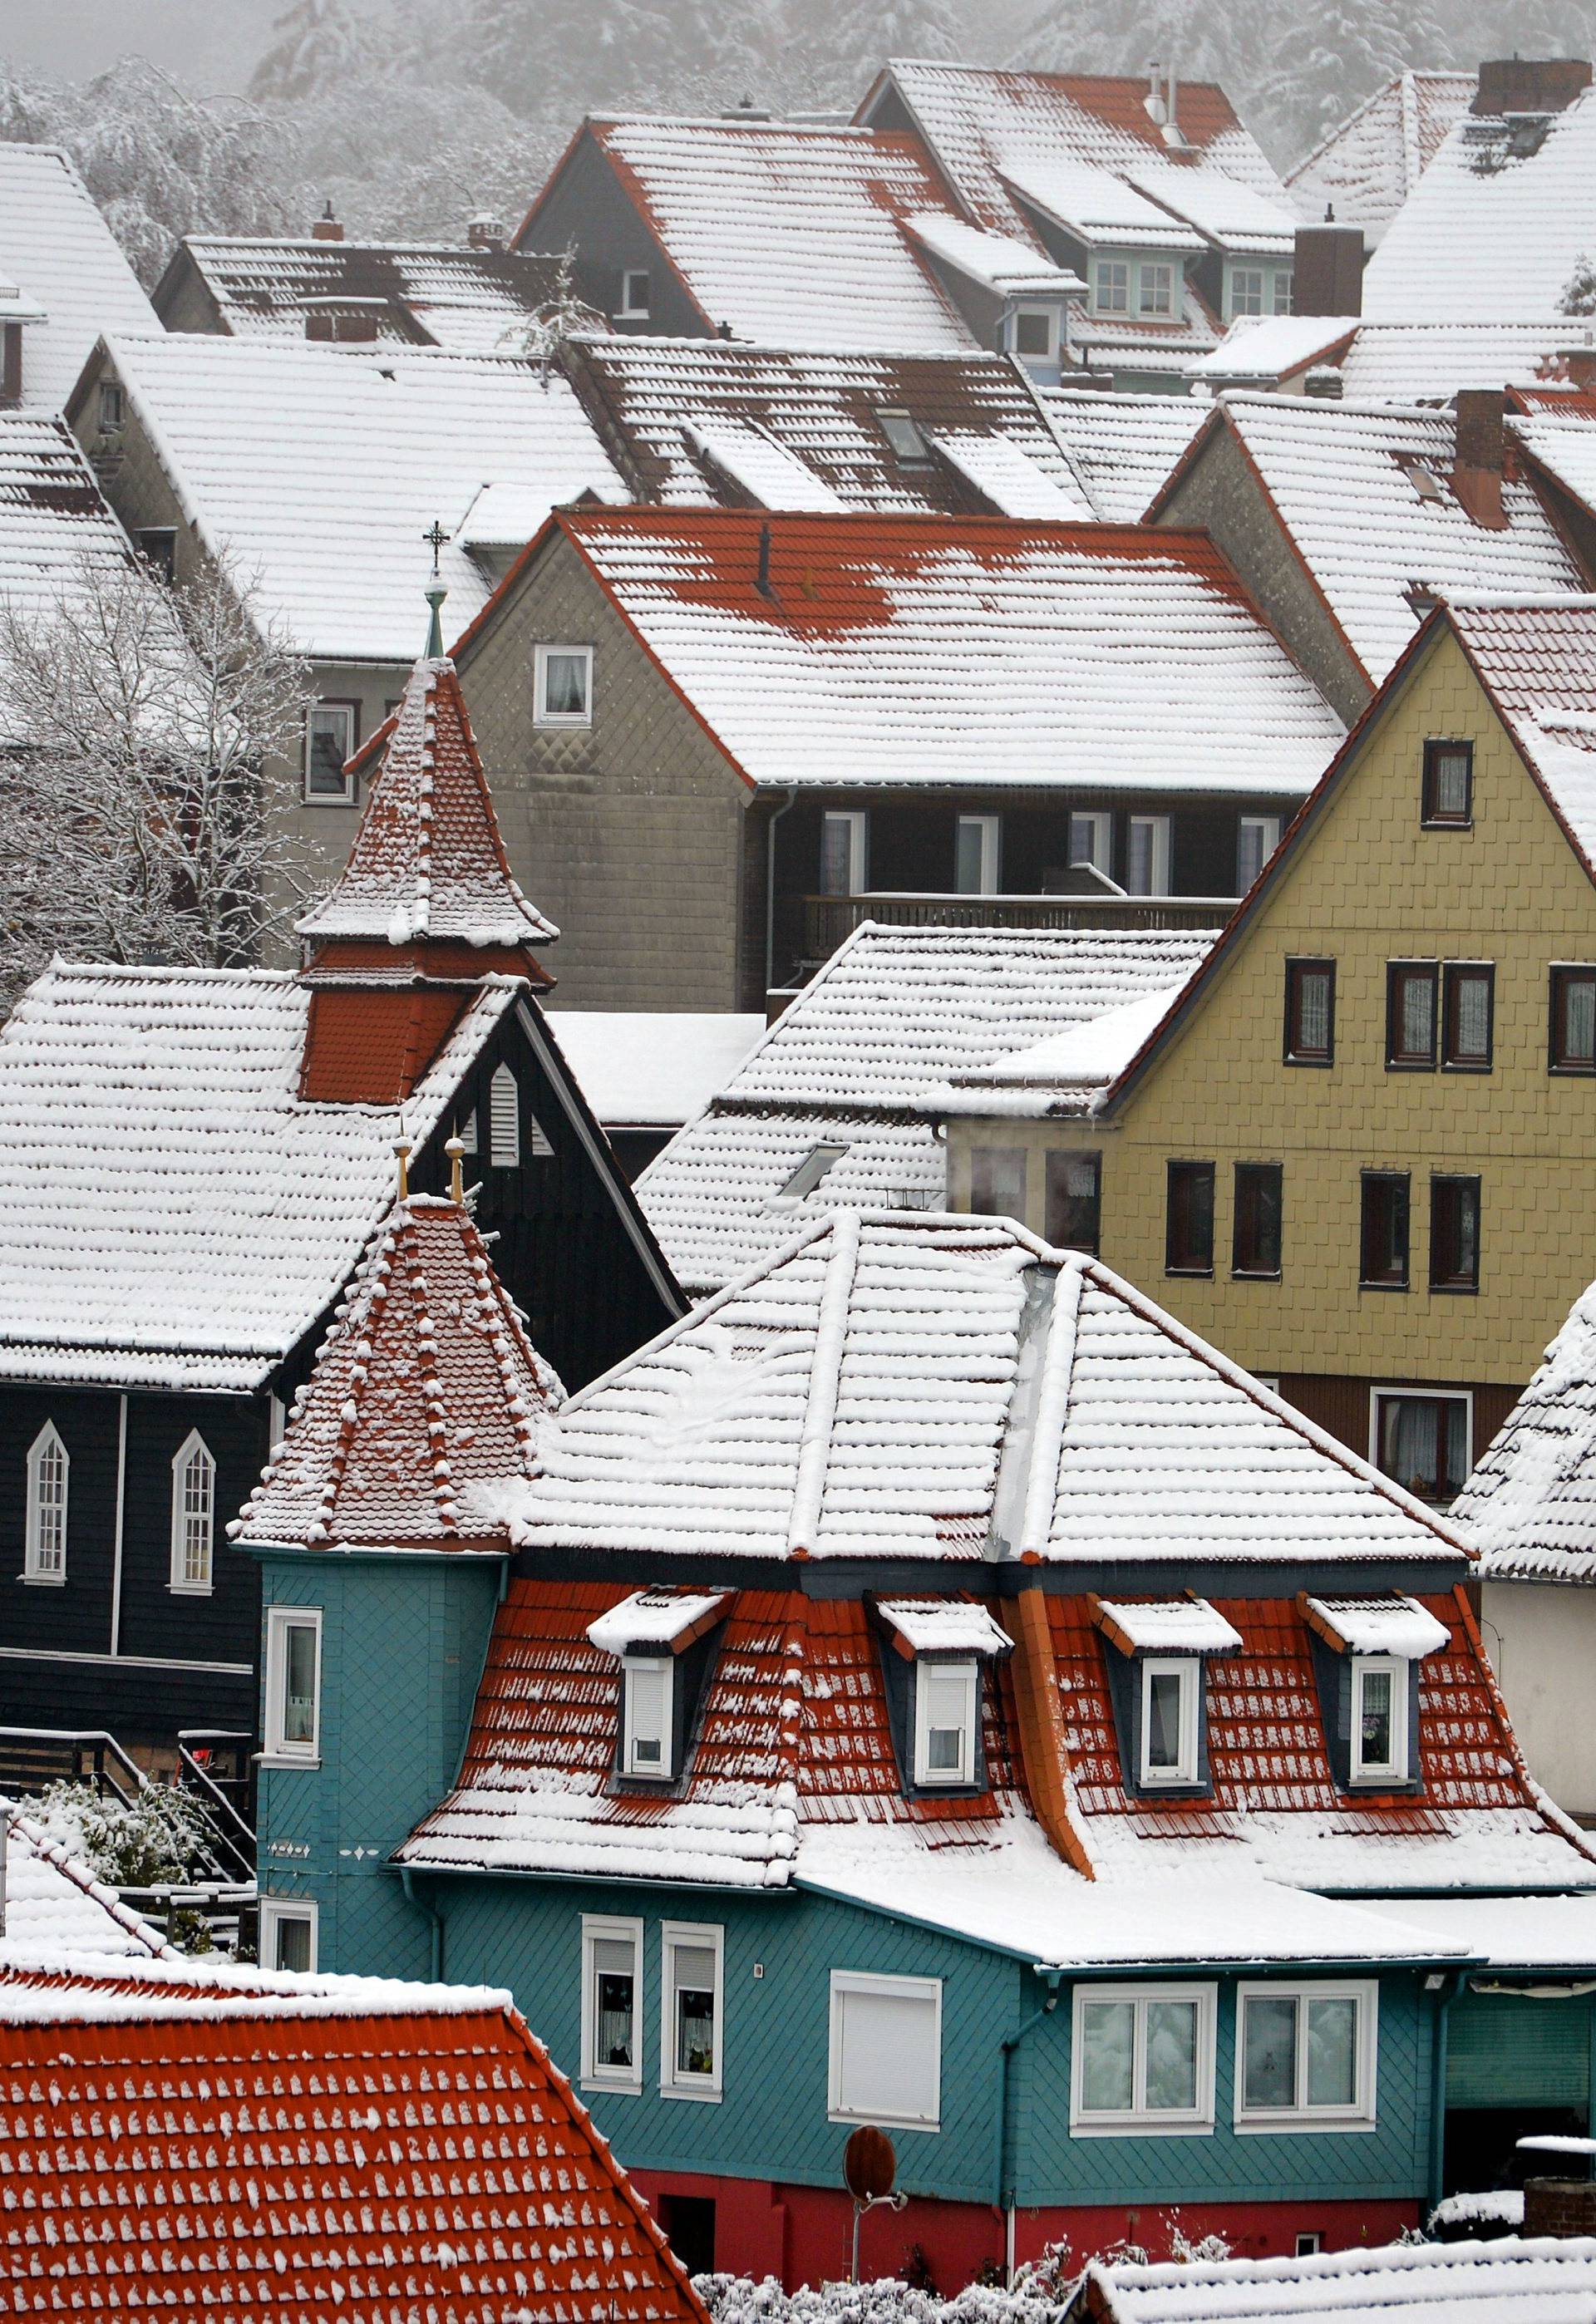 Houses with snow